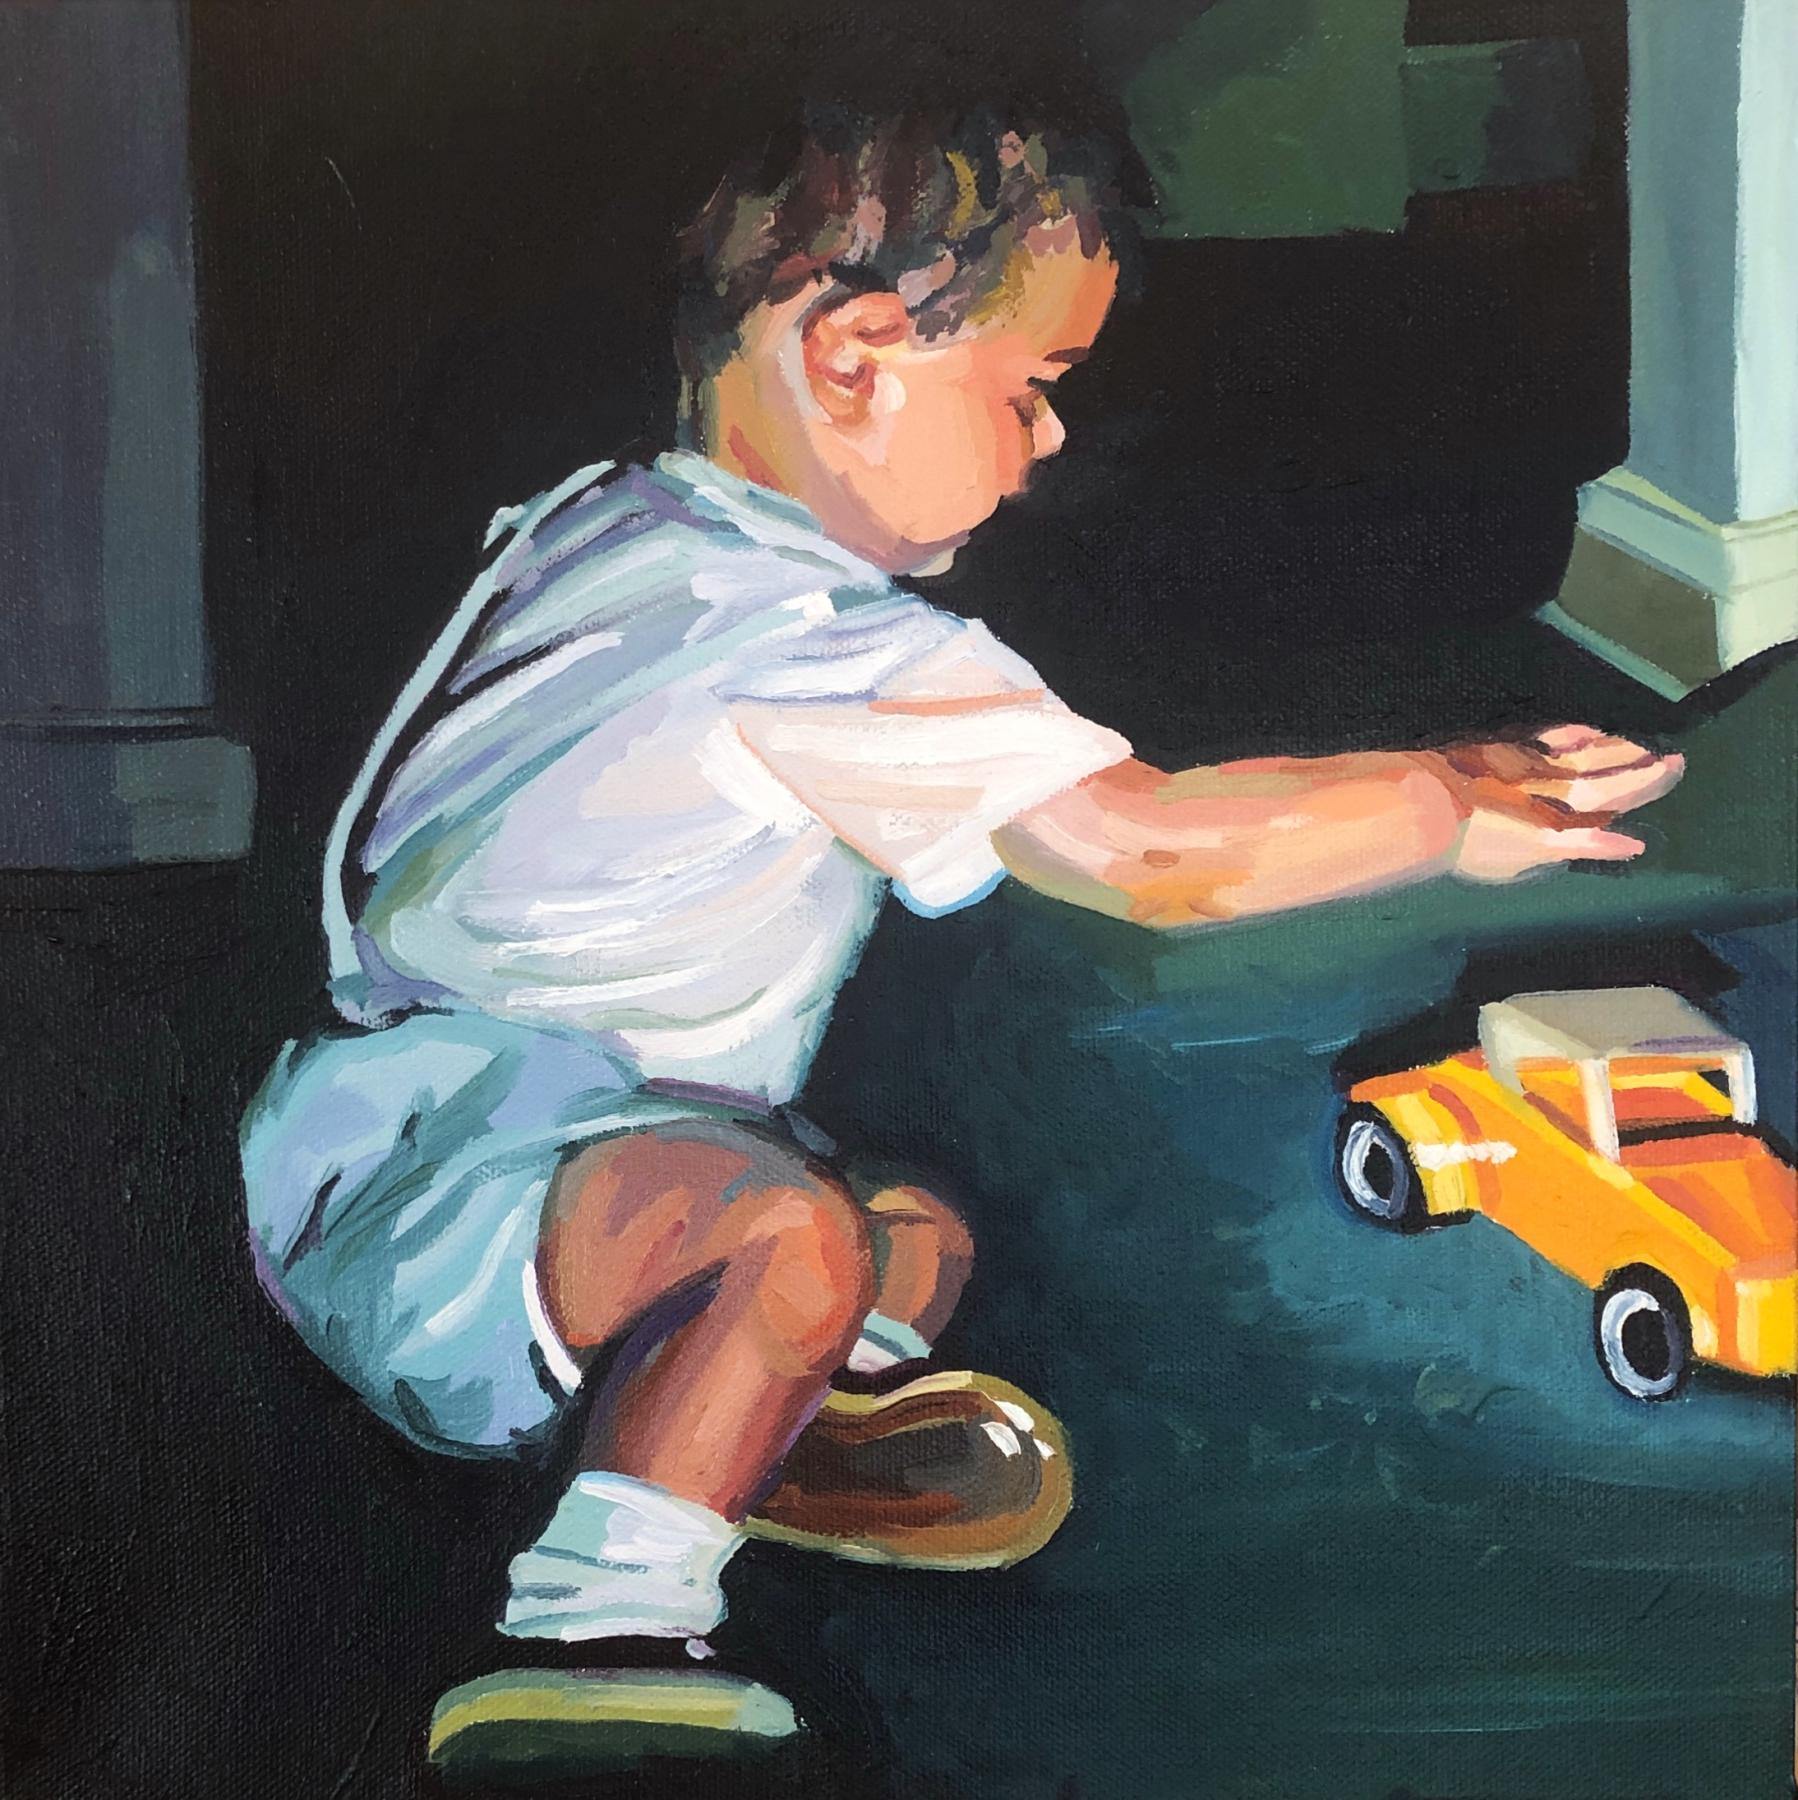 A mid century dressed two year old boy reaching for a yellow toy car. There is strong lighting with a black and dark green room background. 